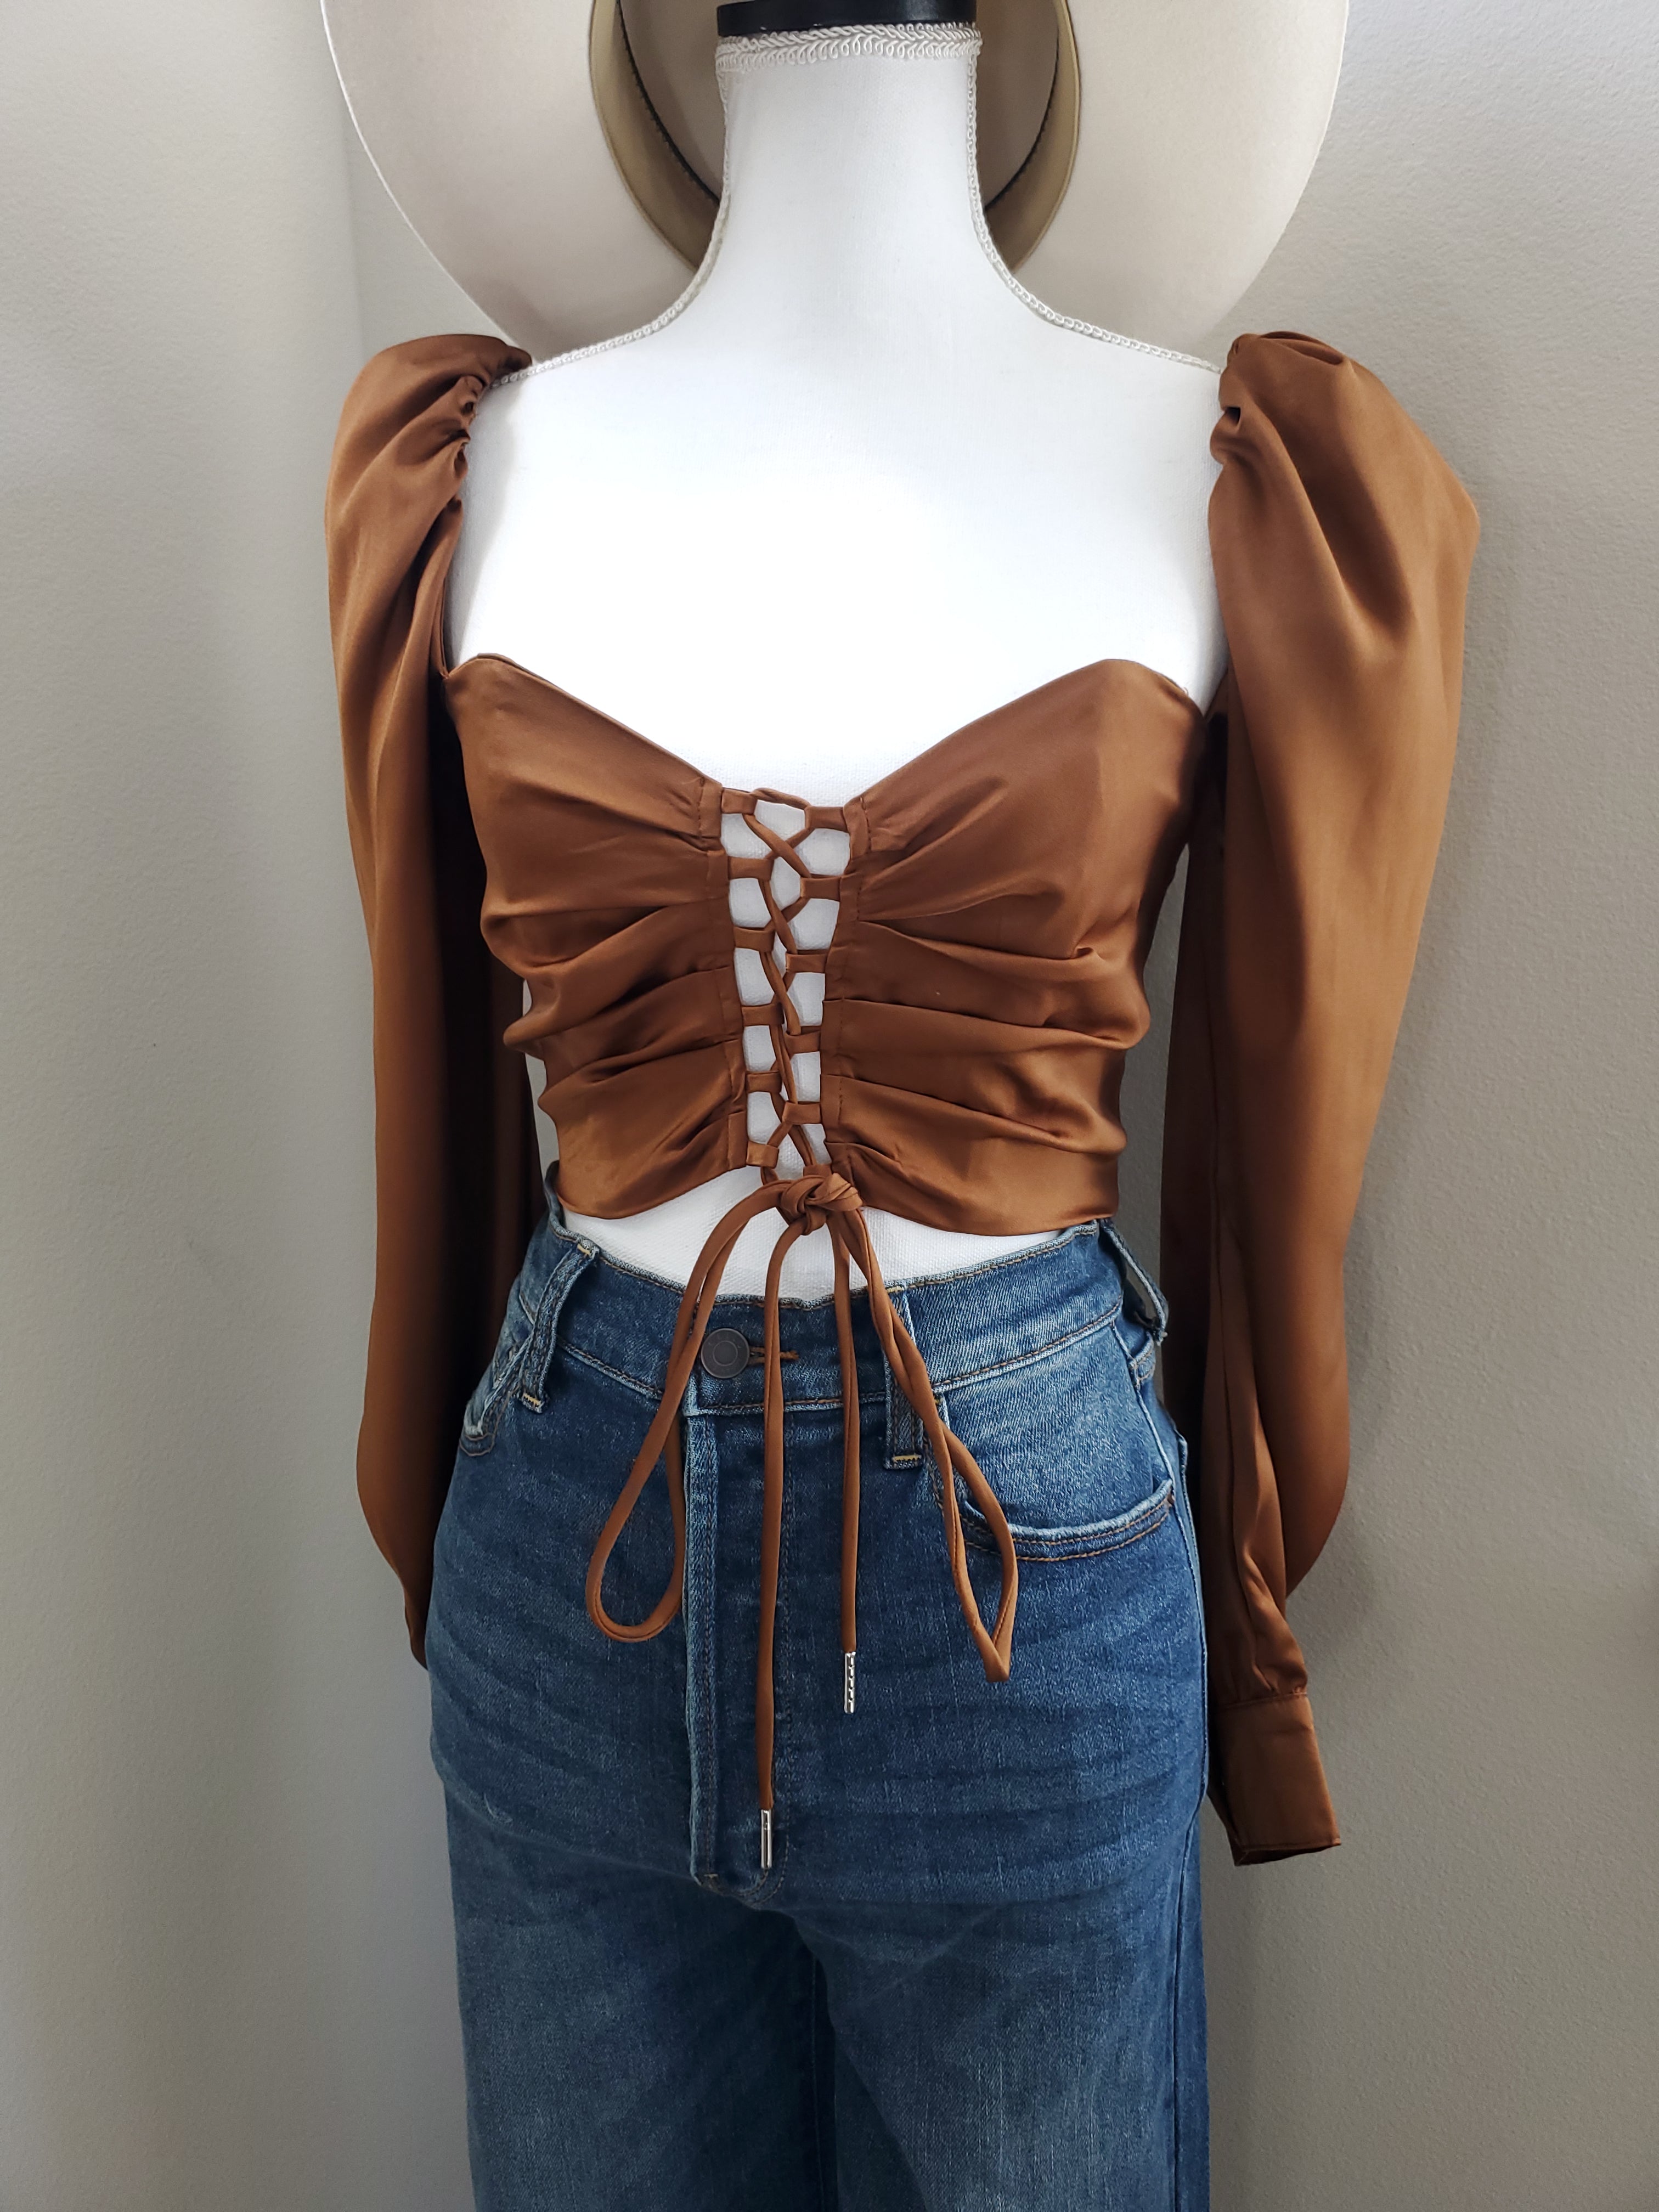 SOLID SATIN FRONT LACE UP CROP TOP